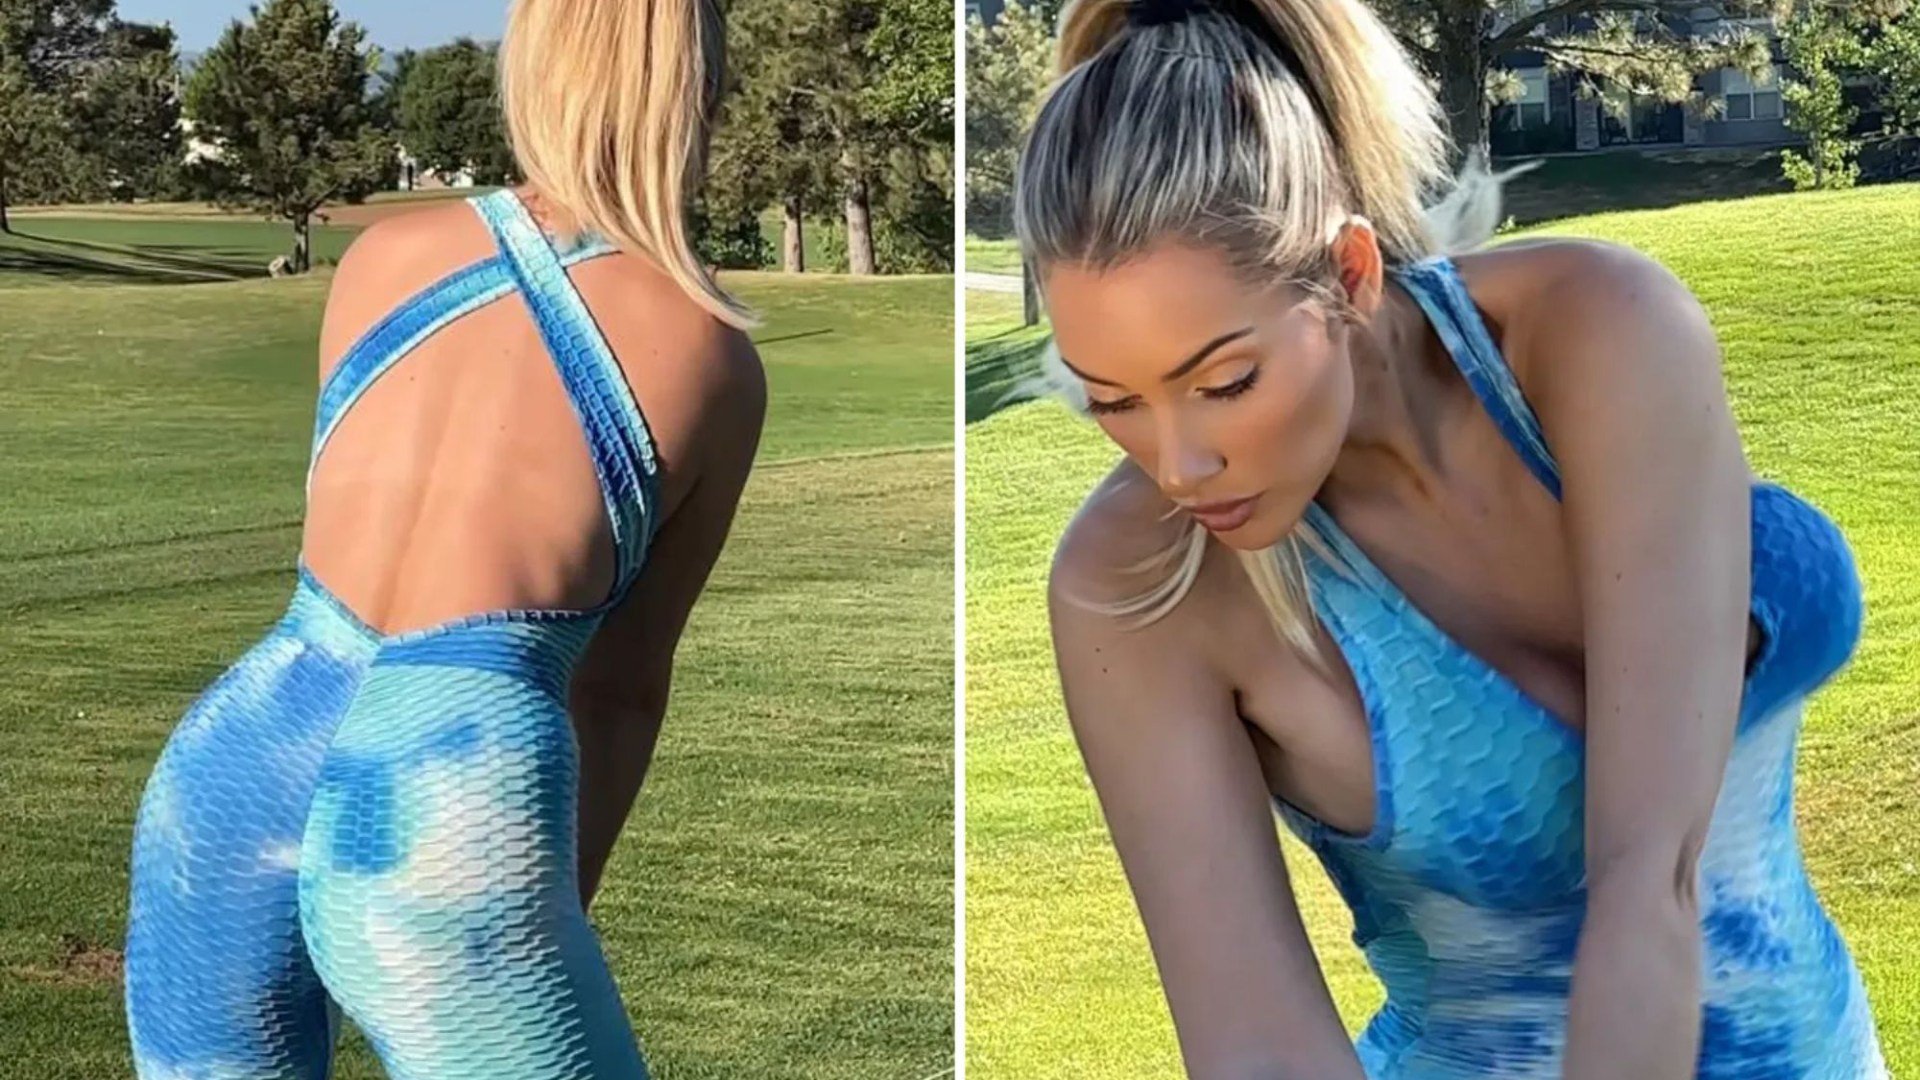 Paige Spiranac gives hack for golfers with big boobs as she shares video of her swing in slow motion